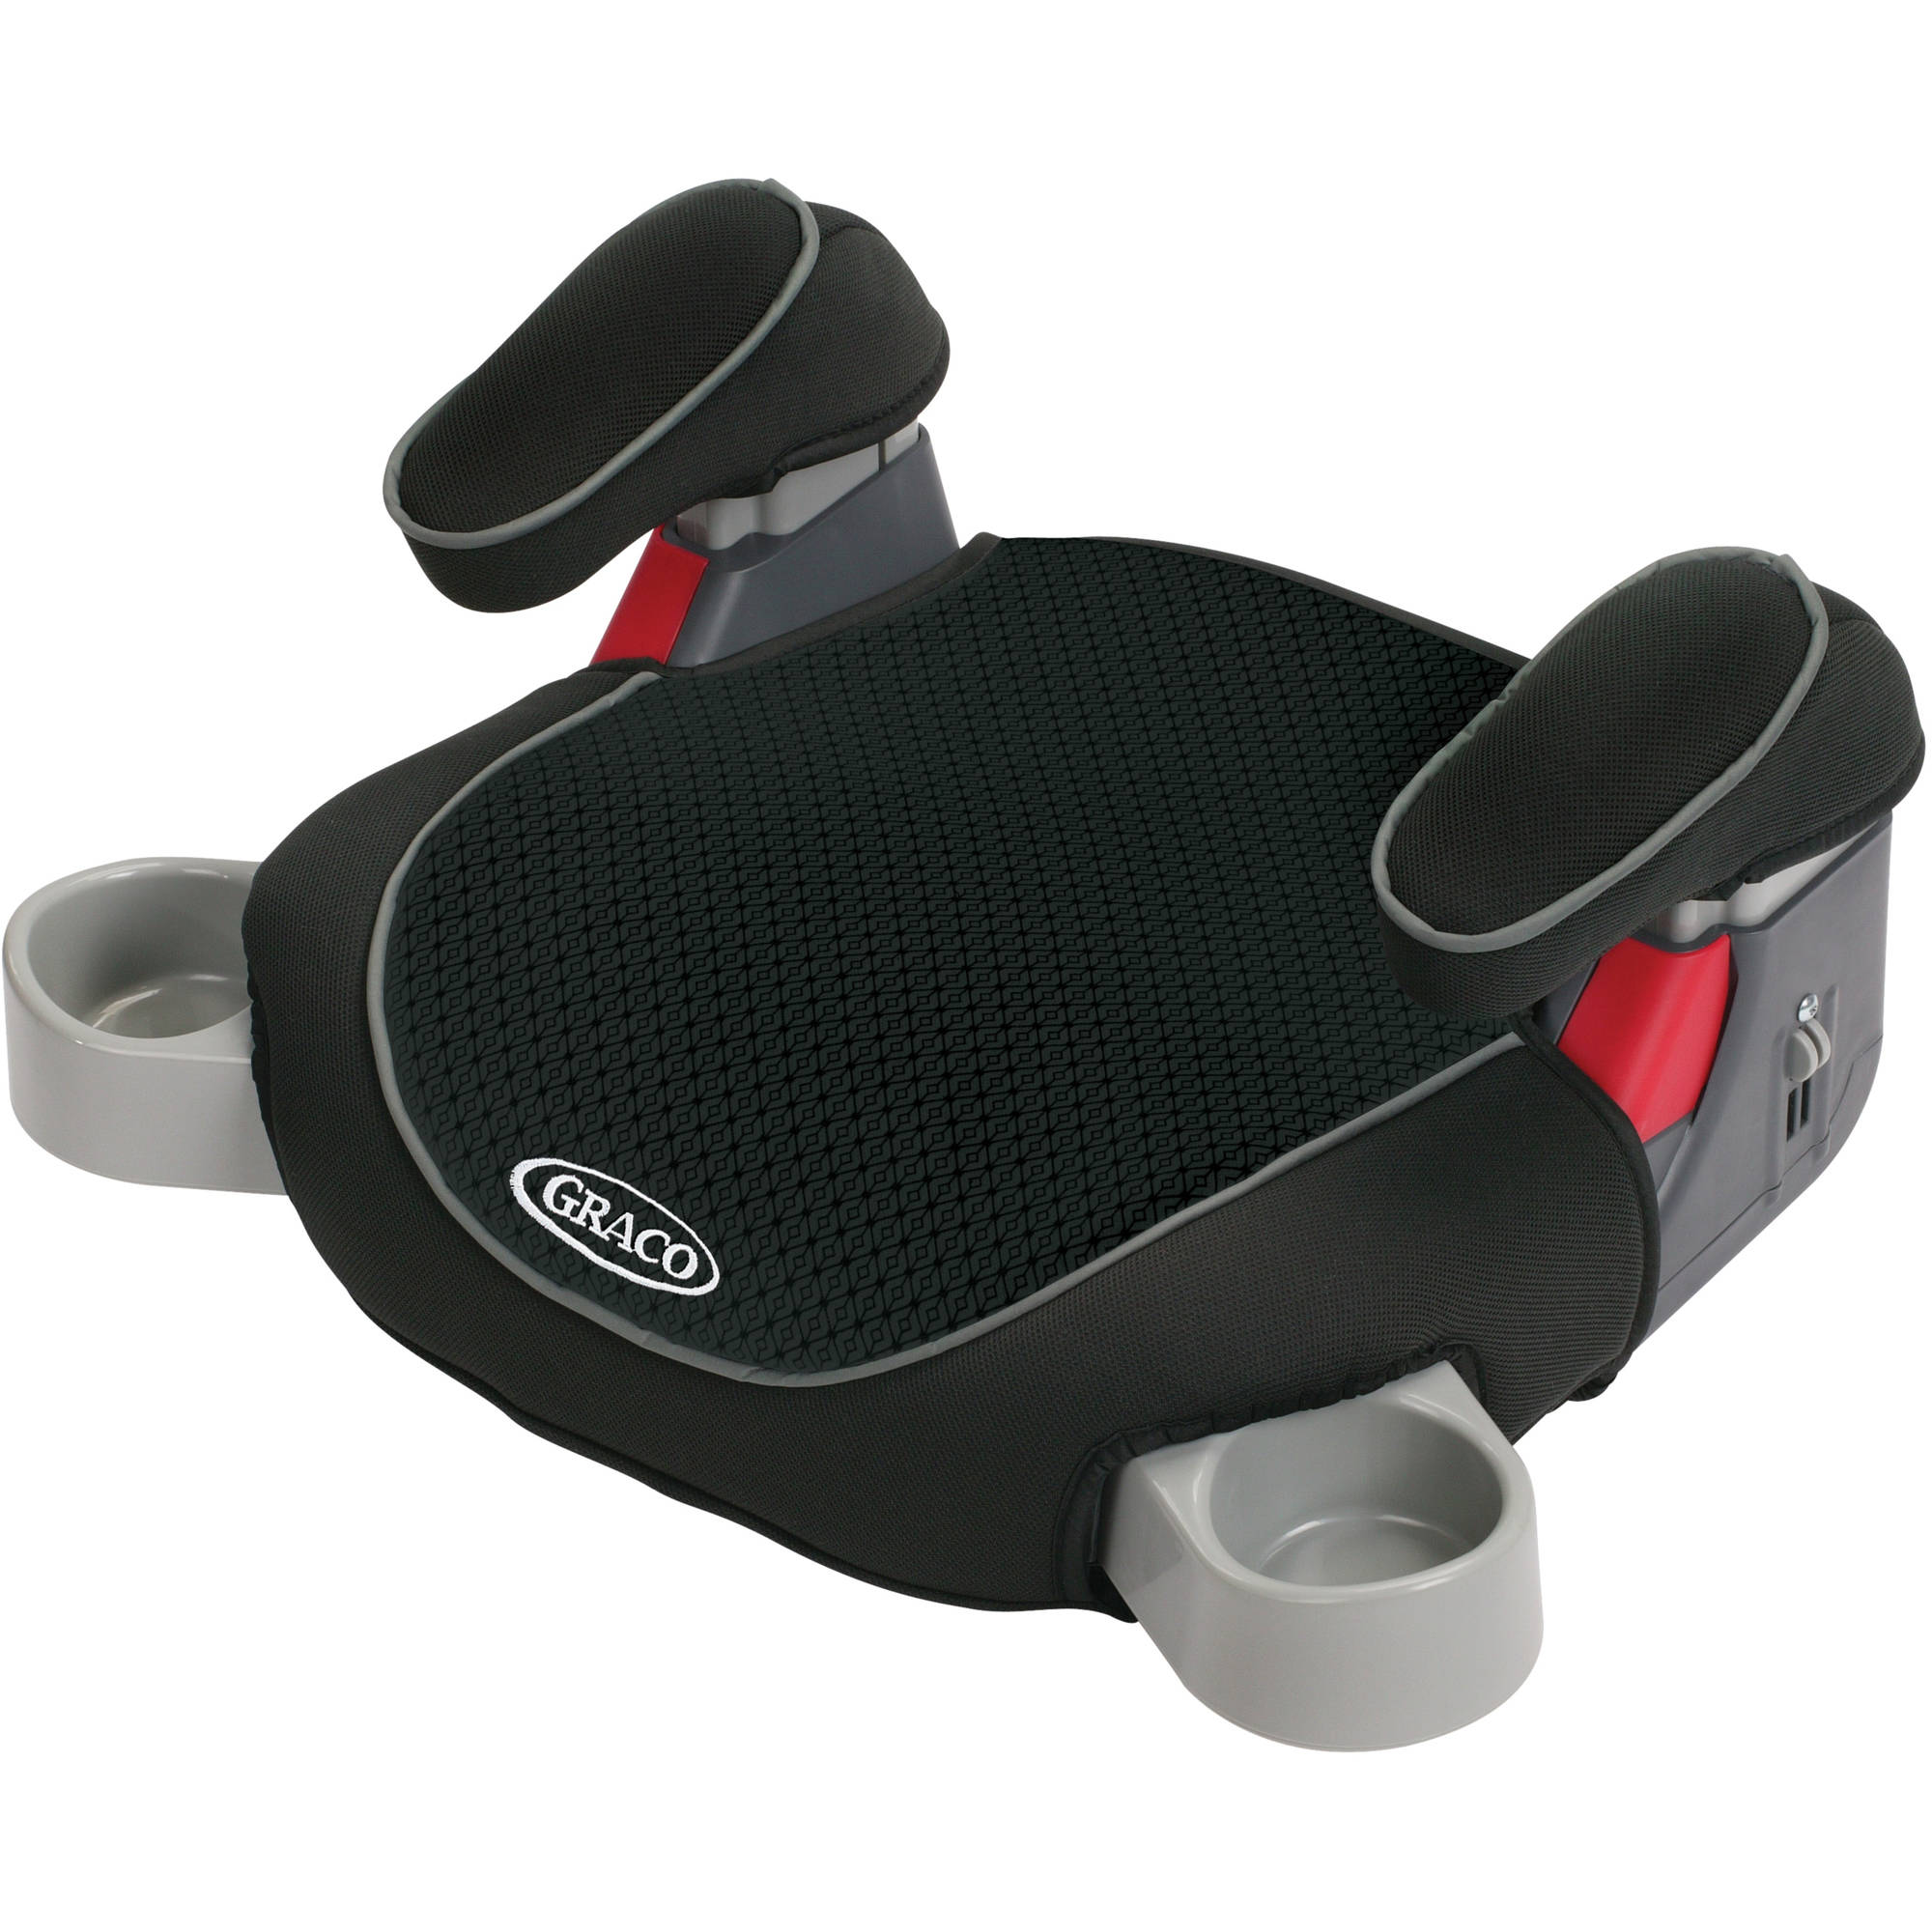 Graco TurboBooster Backless Booster Car Seat, Dunwoody - image 1 of 5